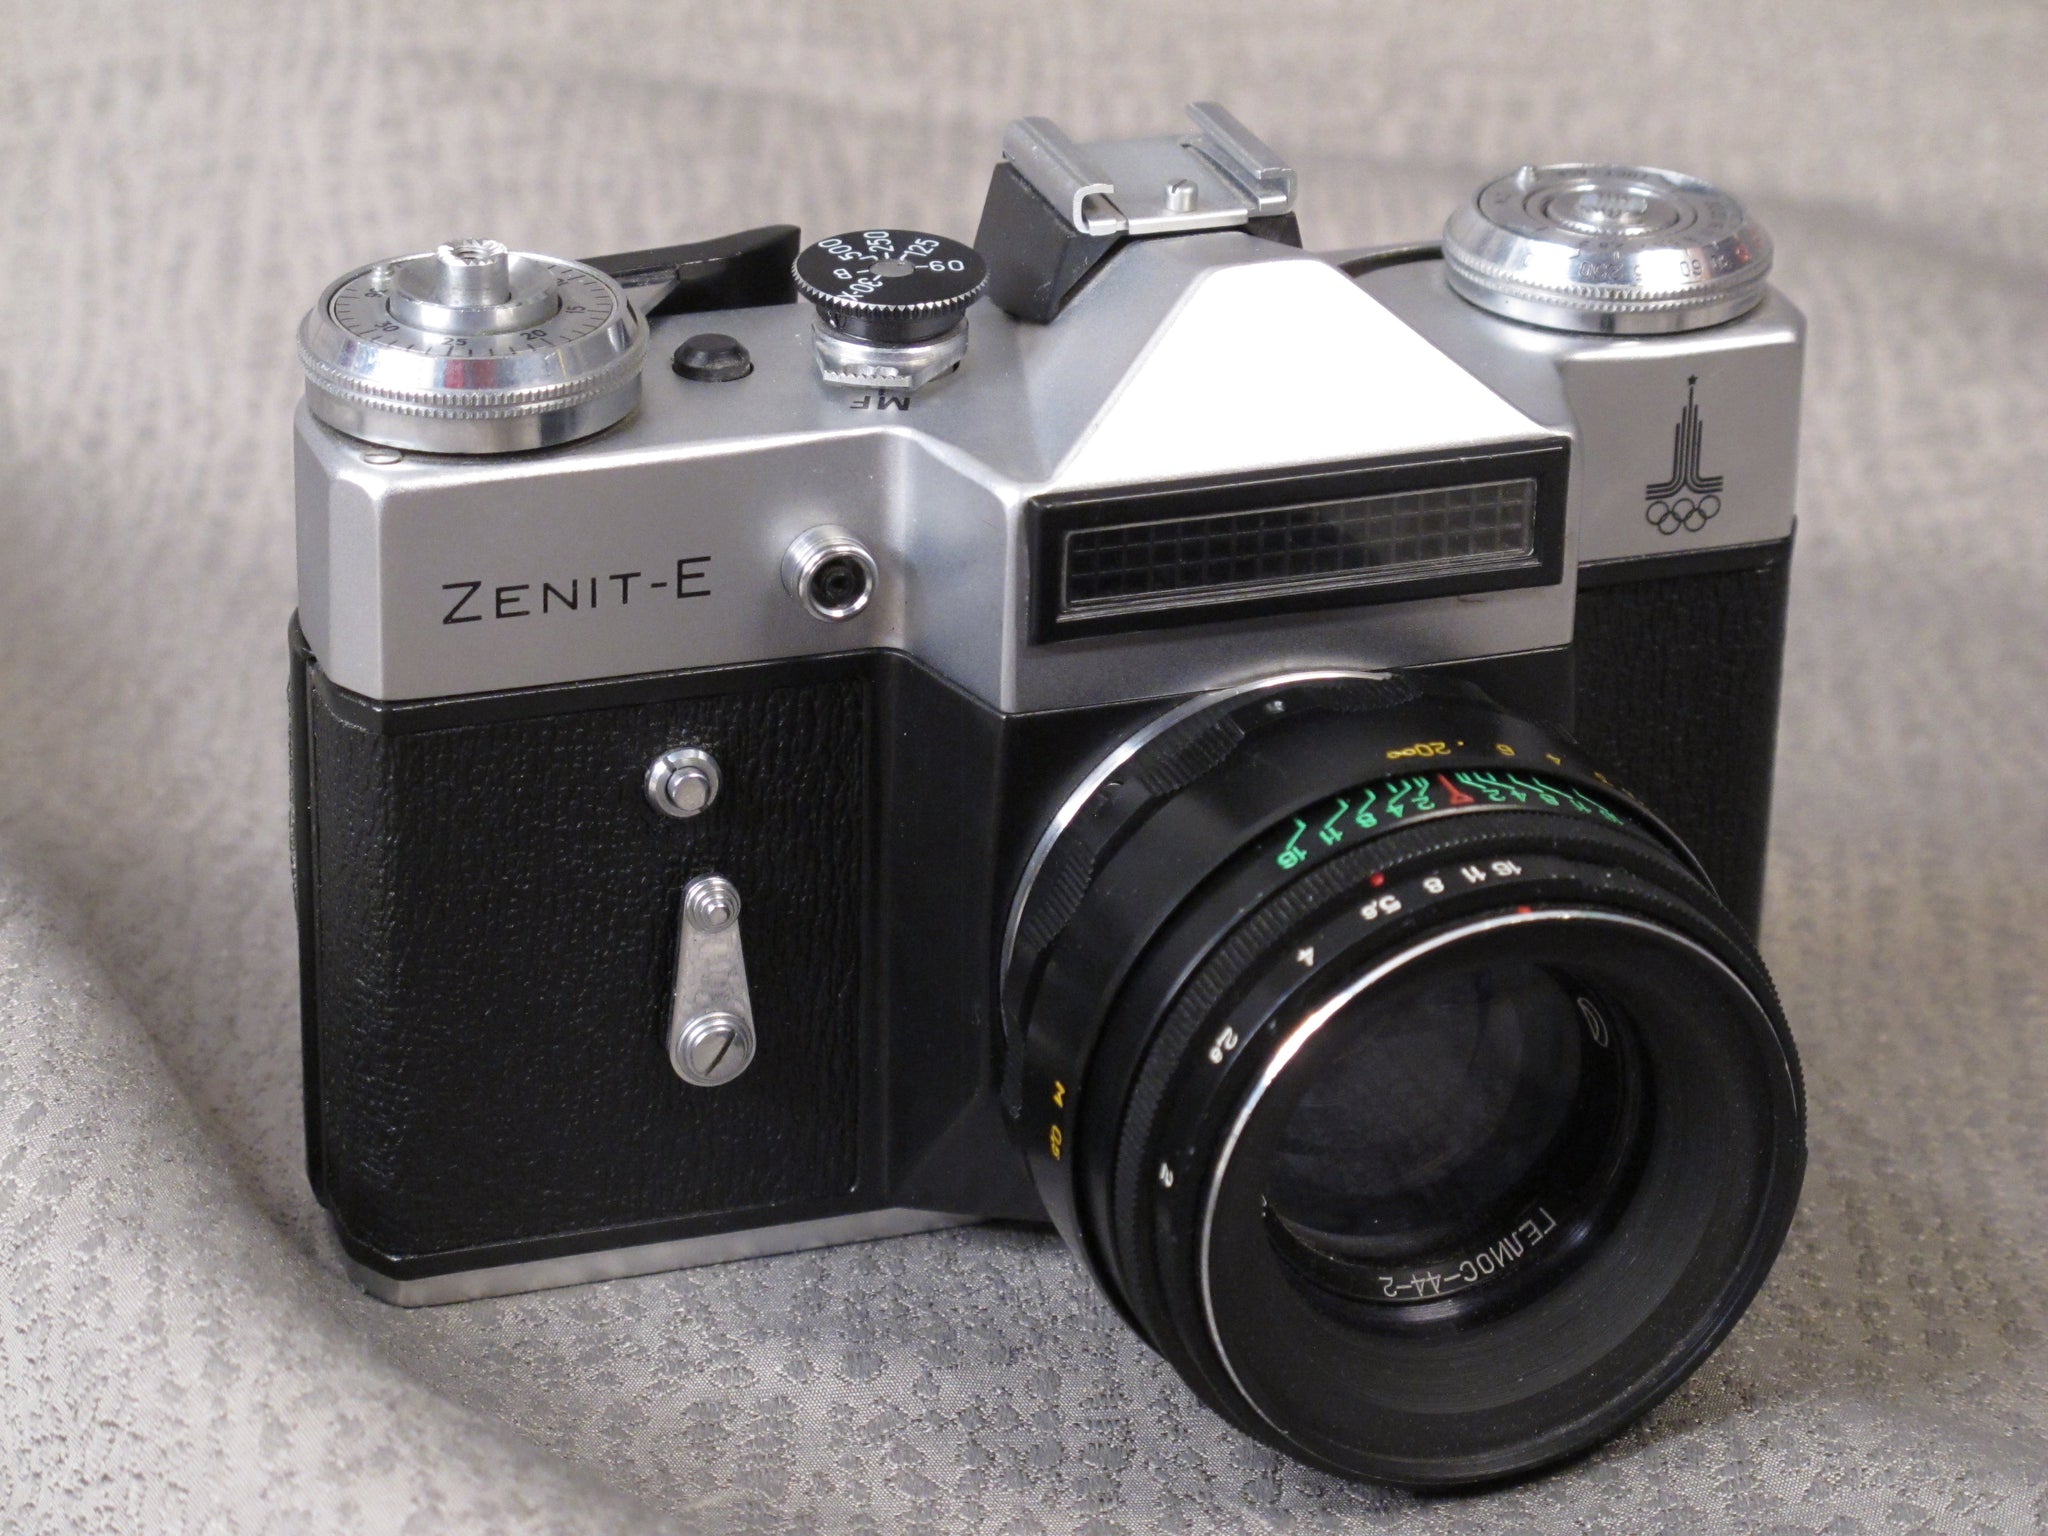 ZENIT-E 35mm Camera with Helios 44-2 58mm f2 Lens (Olympic Version 